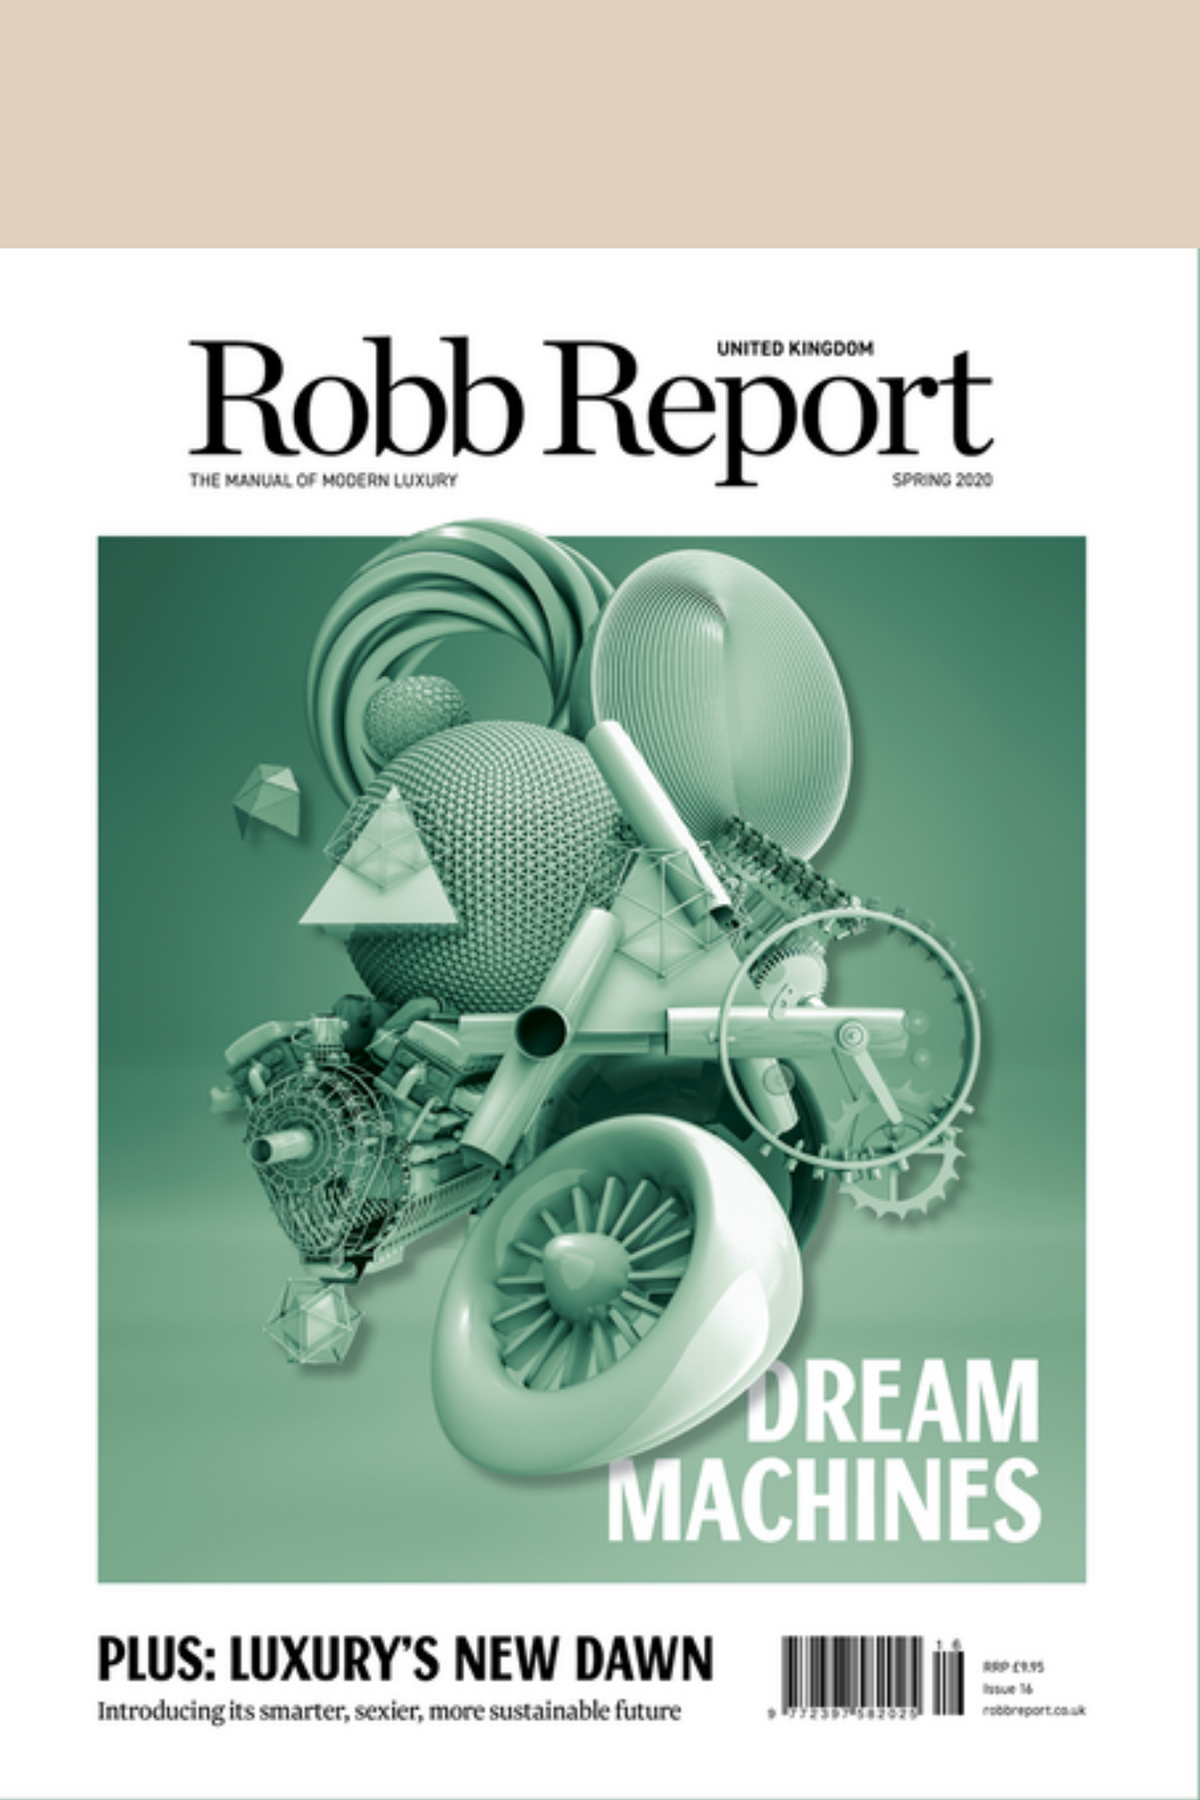 Robb Report UK issue 16, Spring 2020